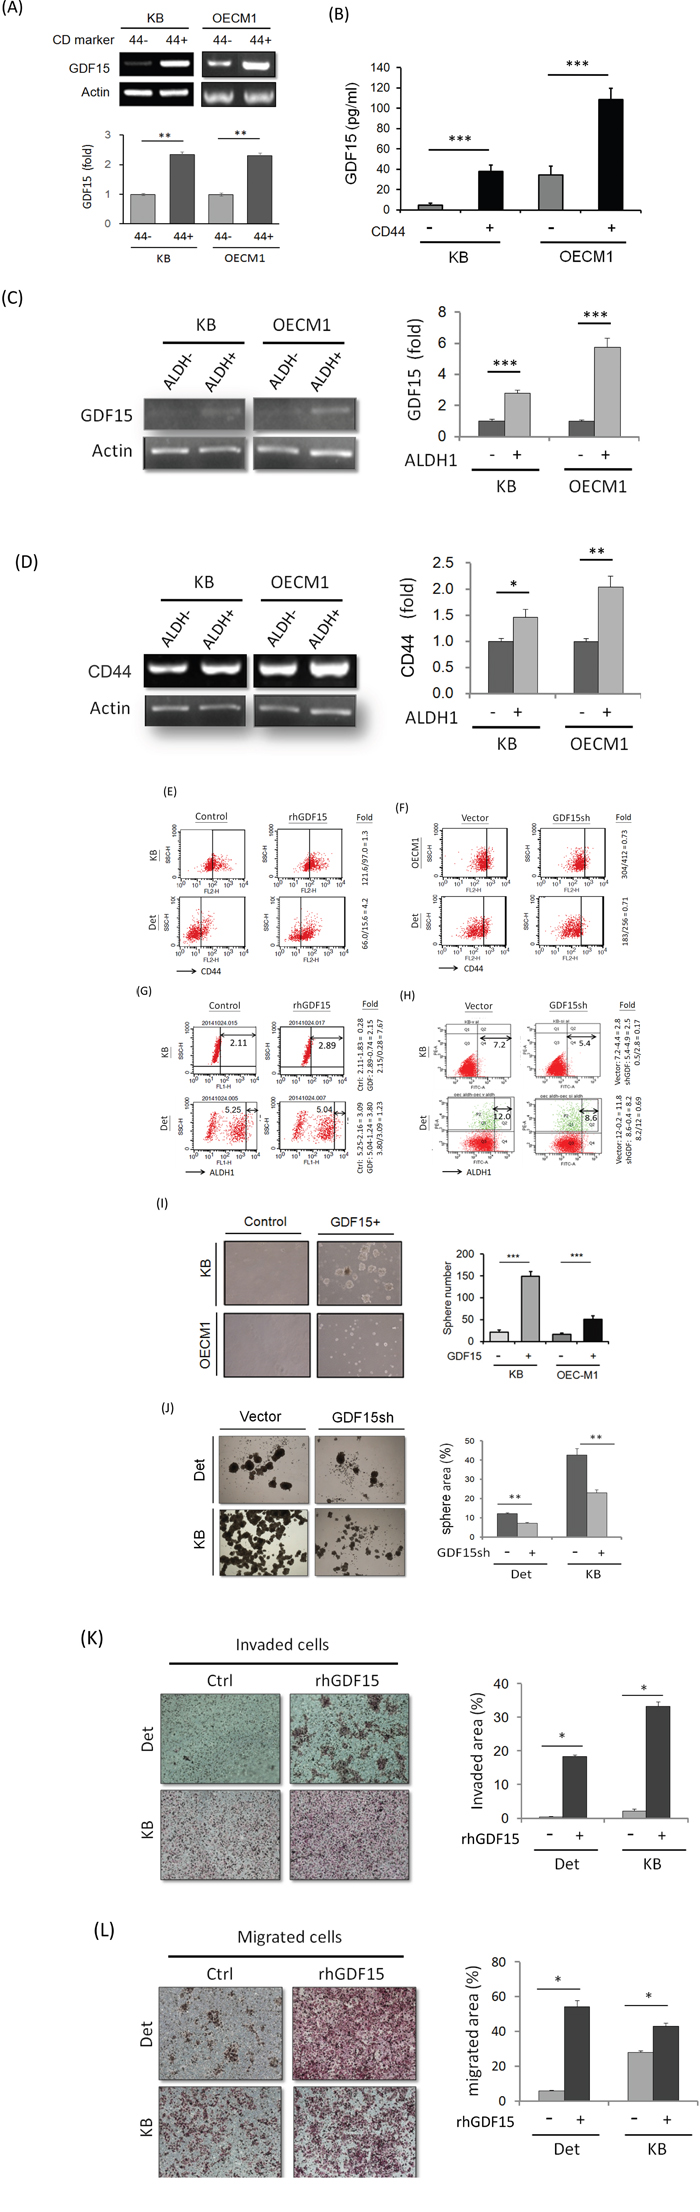 GDF15 promotes cancer stemness via facilitation of CD44+ and ALDH1+ cell populations.